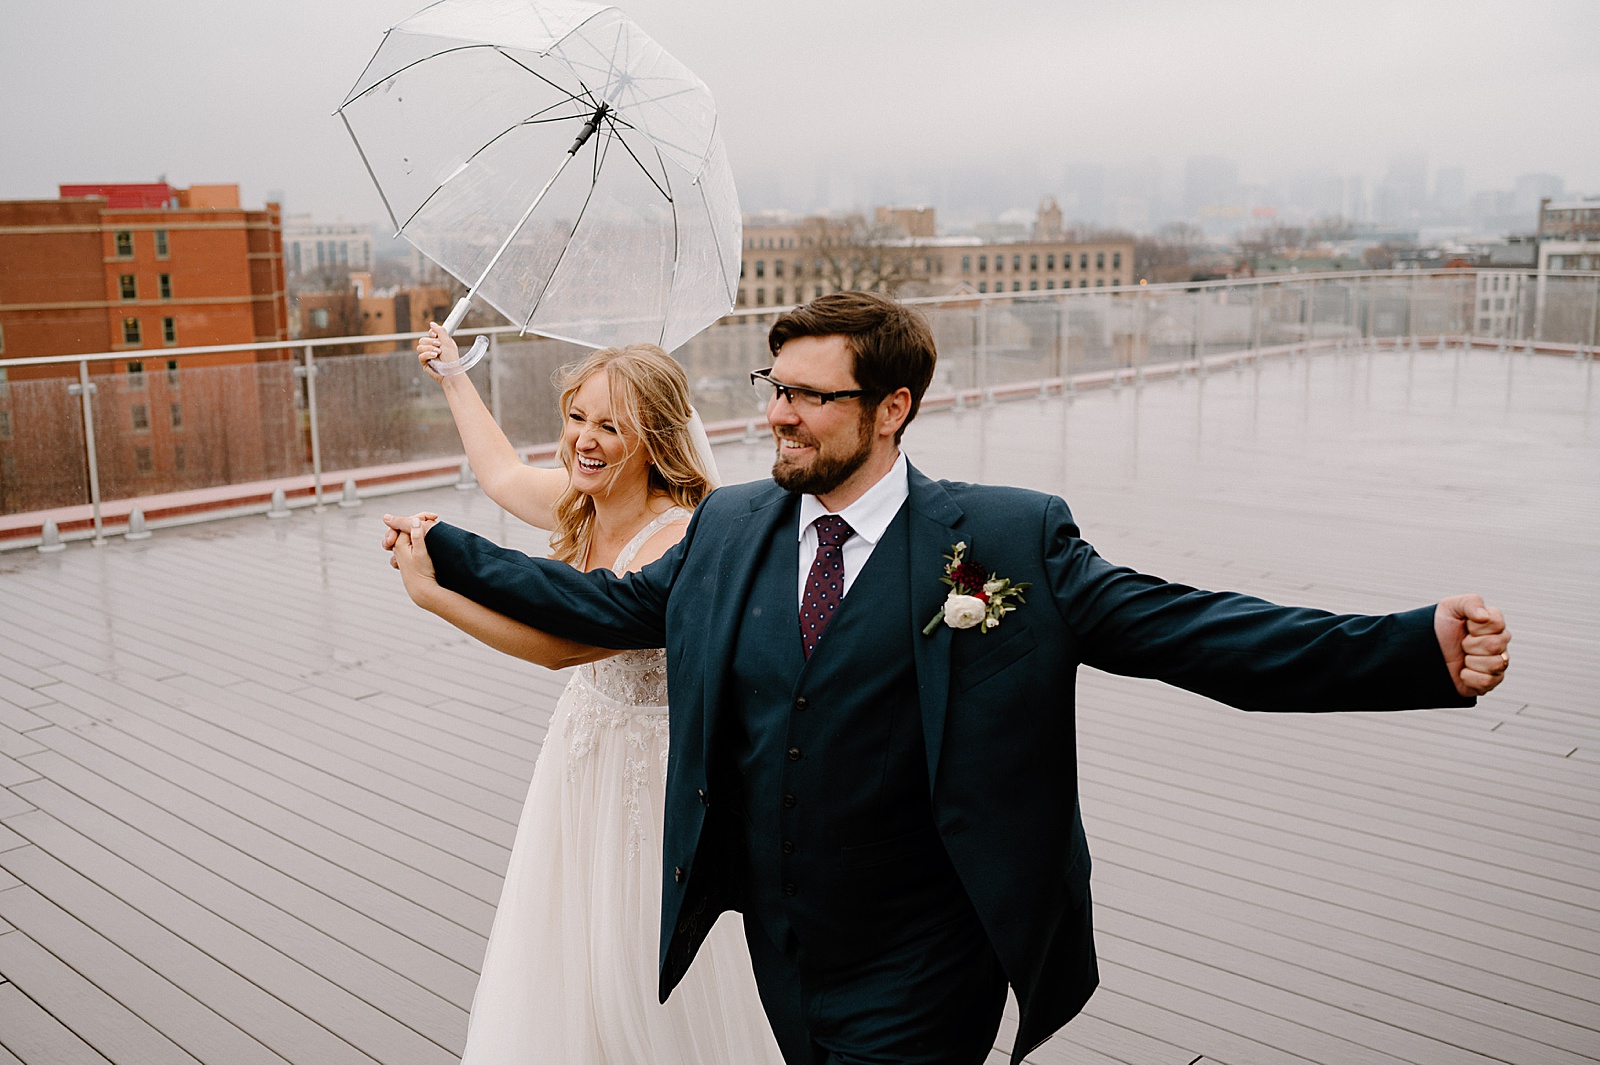 bride and groom laughing in the rain for couples portraits at their wedding 